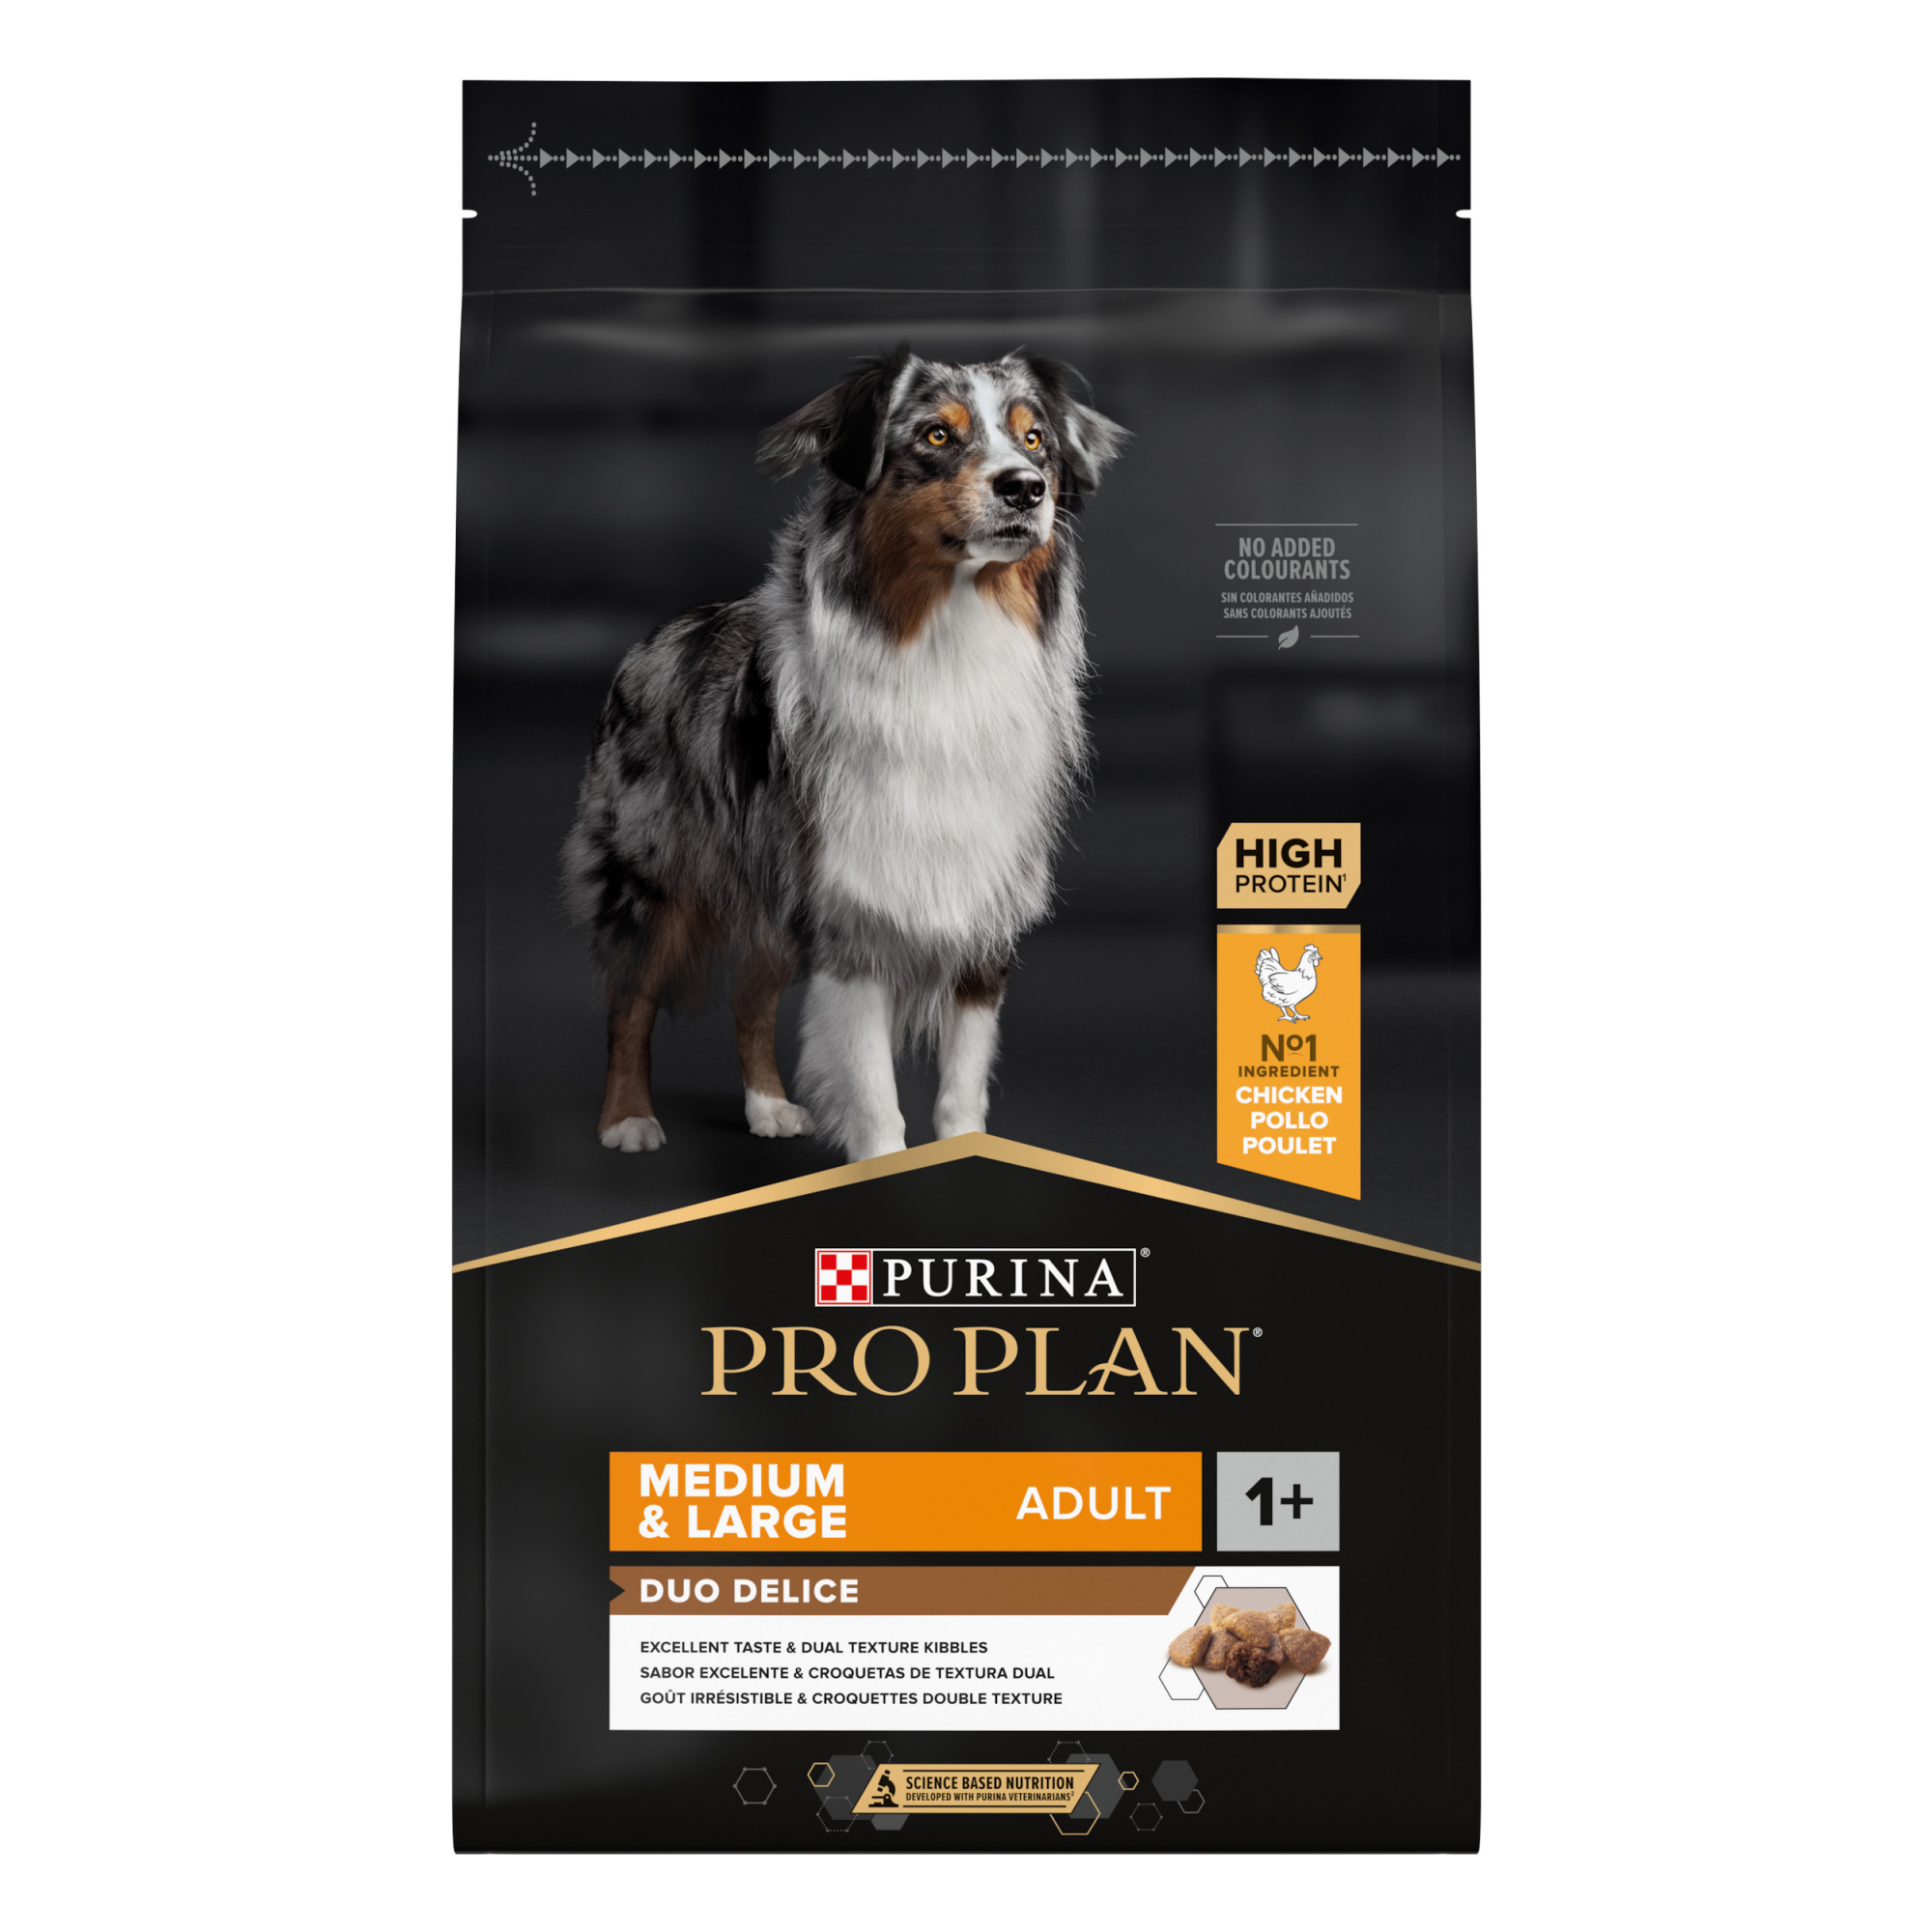 Purina Pro Plan Duo Délice Adult